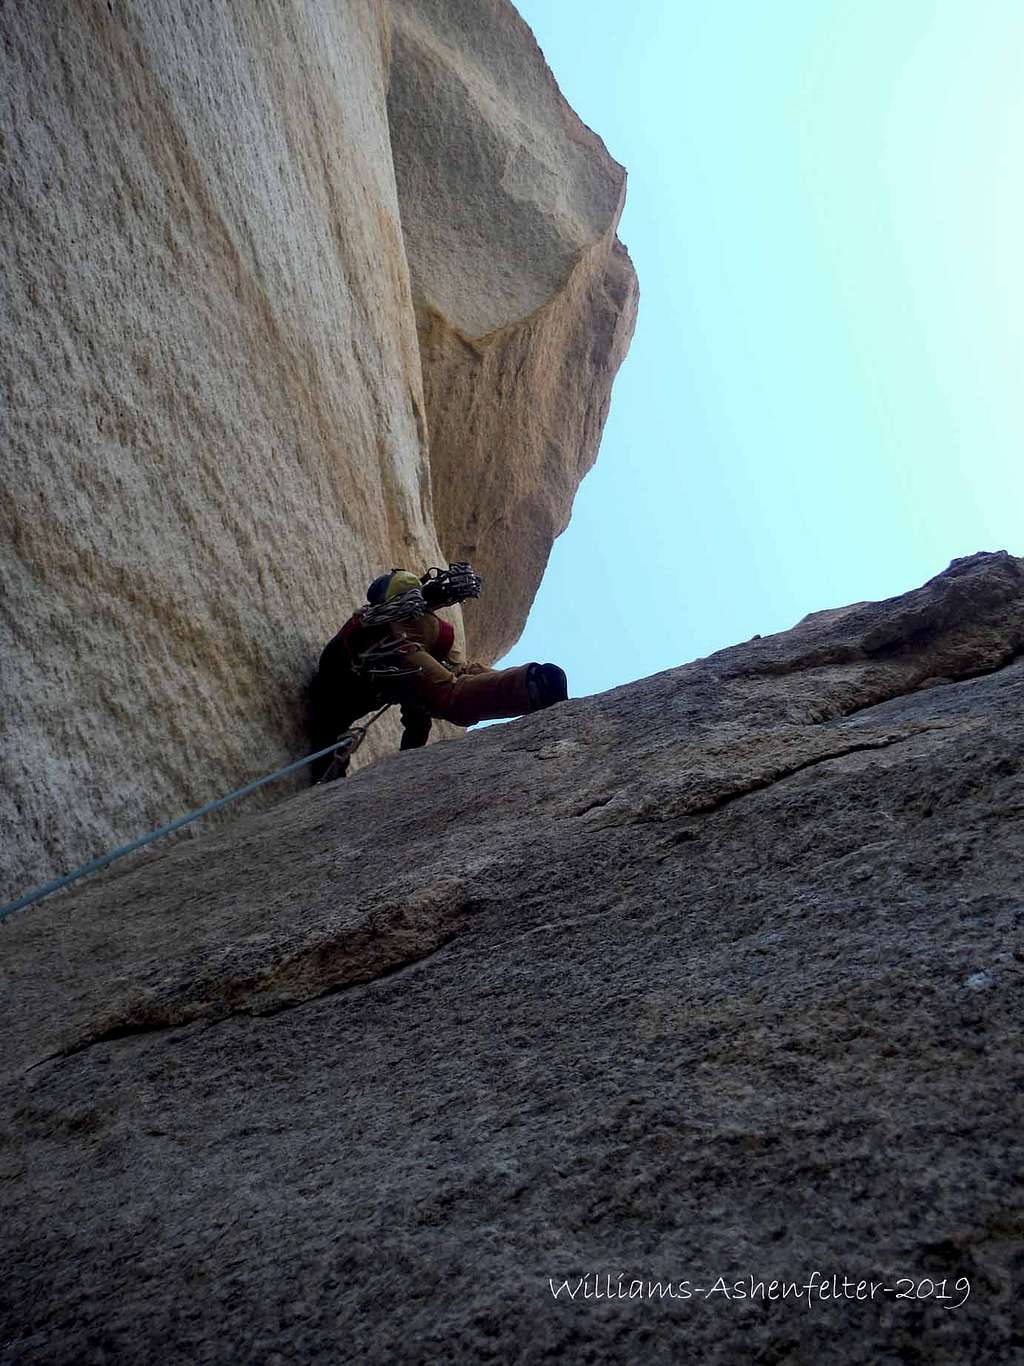 Dow leading Finley's Crack, 5.11a**